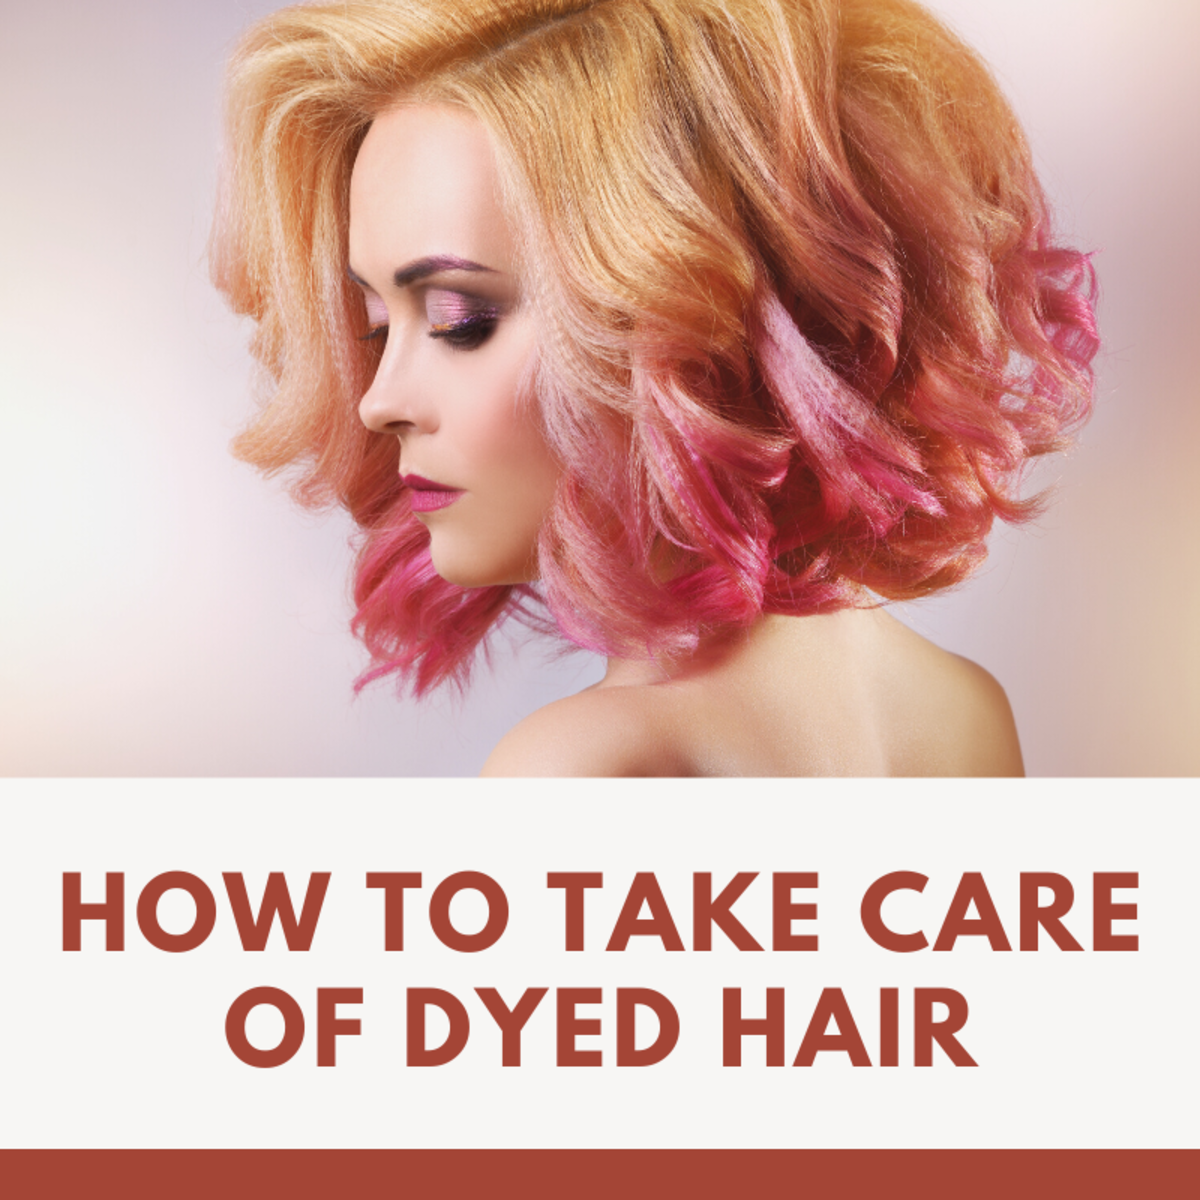 Learn everything you need to know to keep your dyed hair healthy, vibrant, and colorful.